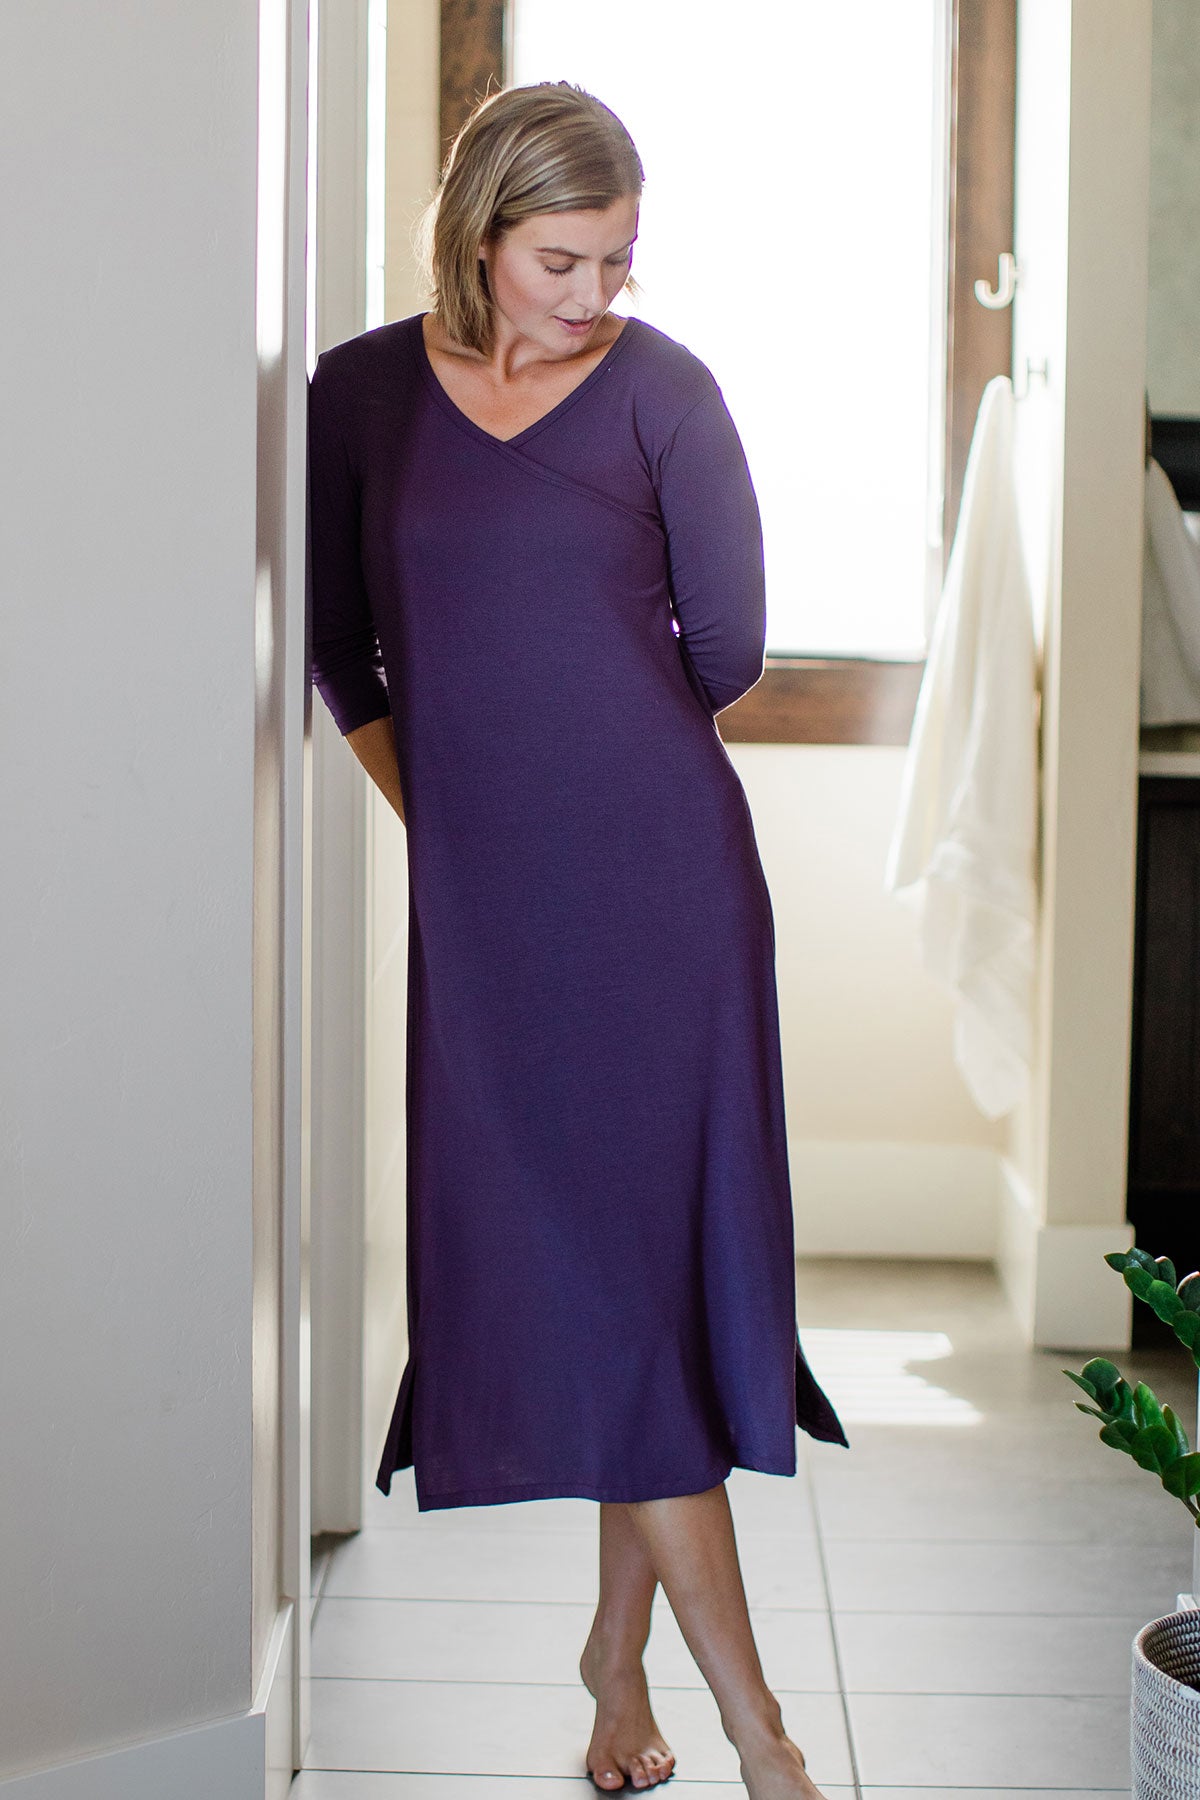 A woman standing with one leg in front of the other while leaning her shoulder against a wall, wearing Yala Haley Crossover Front Three Quarter Sleeve Bamboo Nightgown in Aster